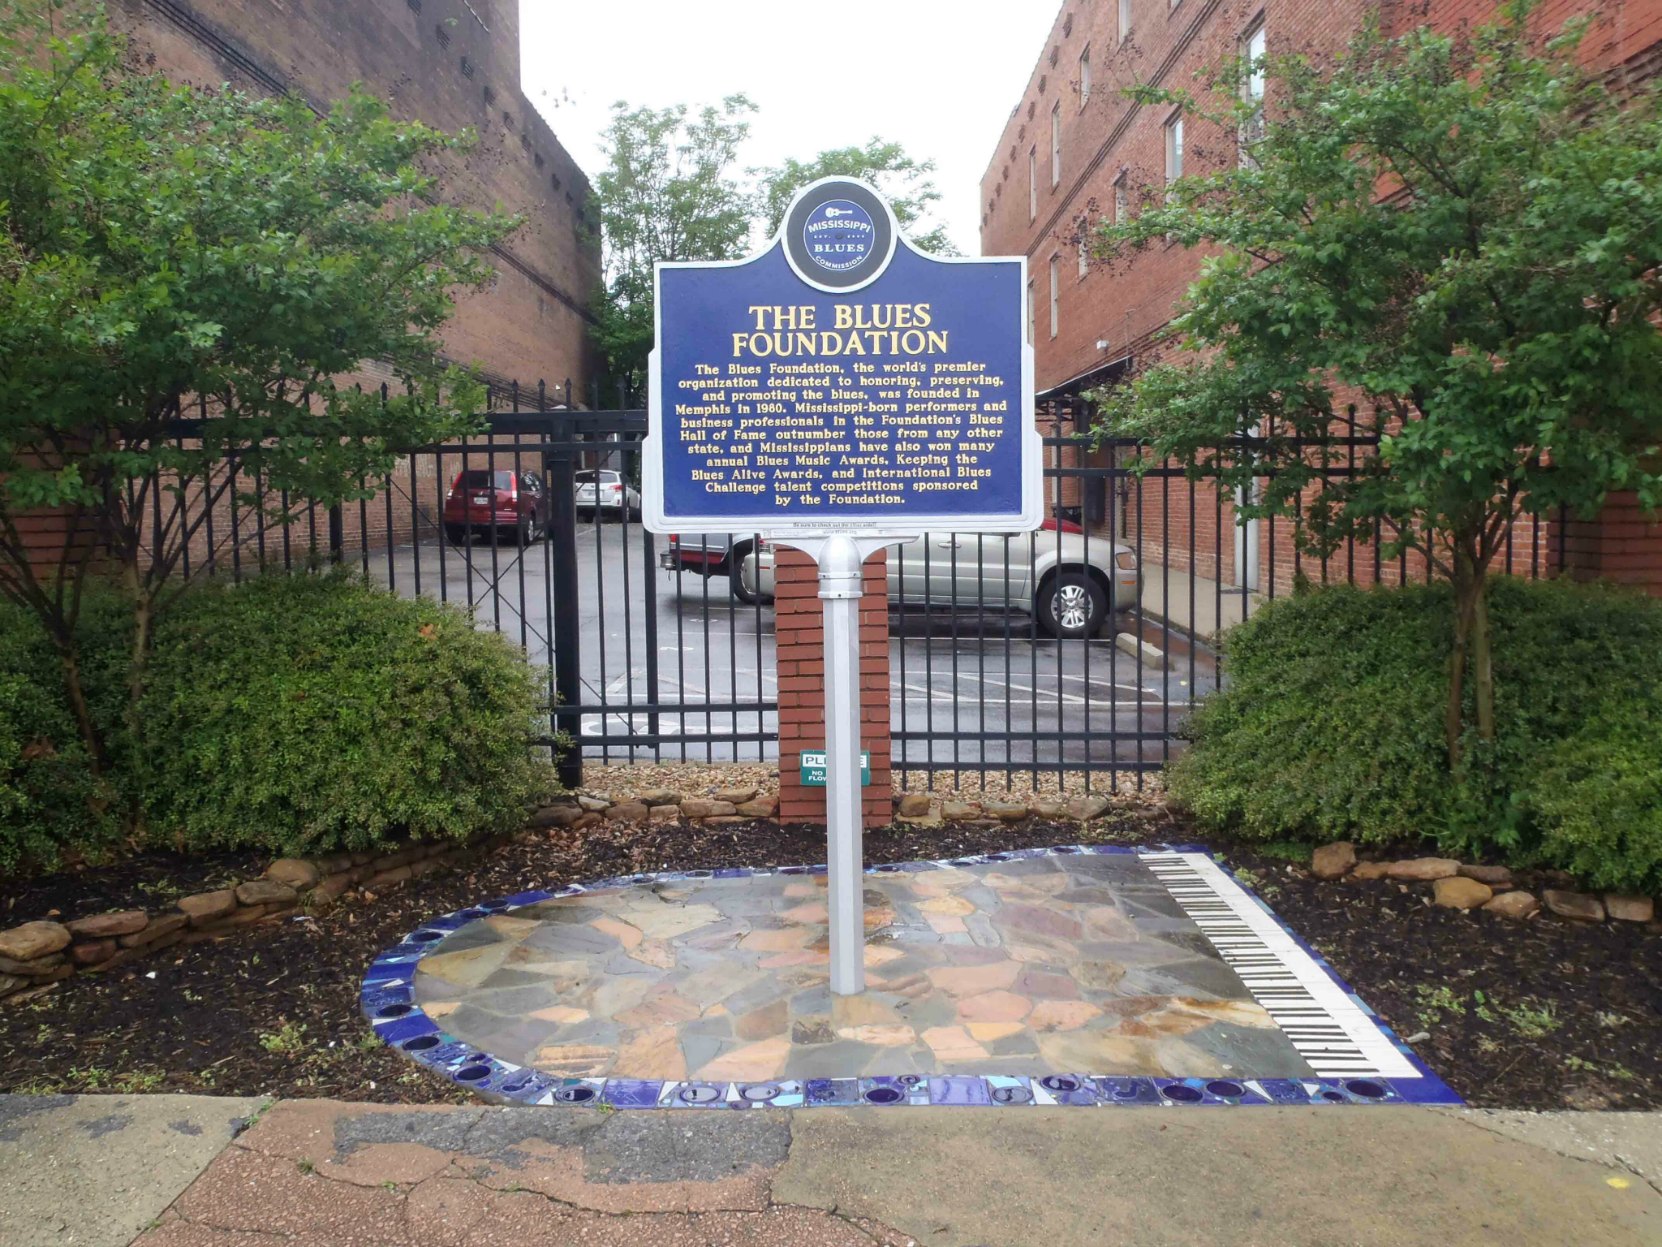 Mississippi Blues Trail marker, The Blues Foundation, S. Main Street, Memphis, Tennessee